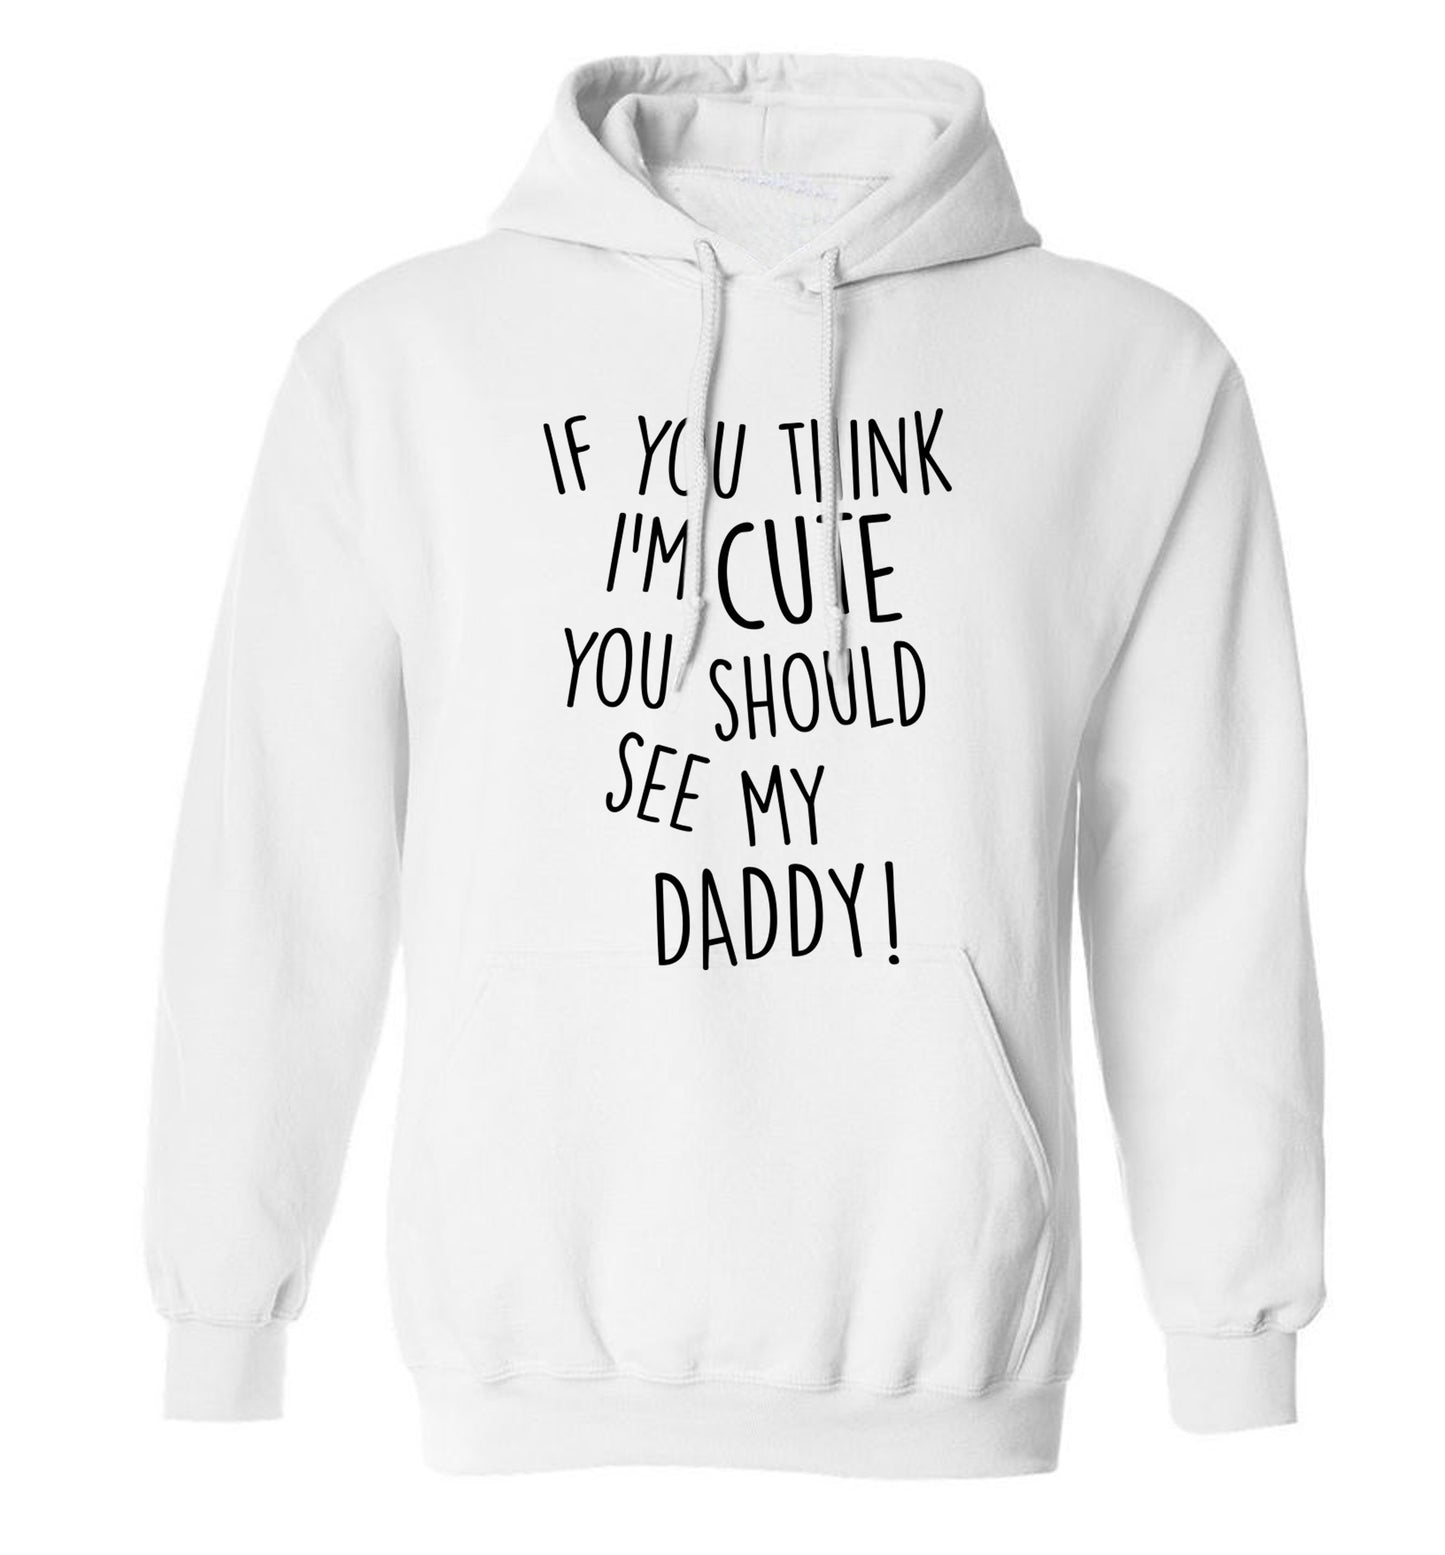 If you think I'm cute you should see my daddy adults unisex white hoodie 2XL